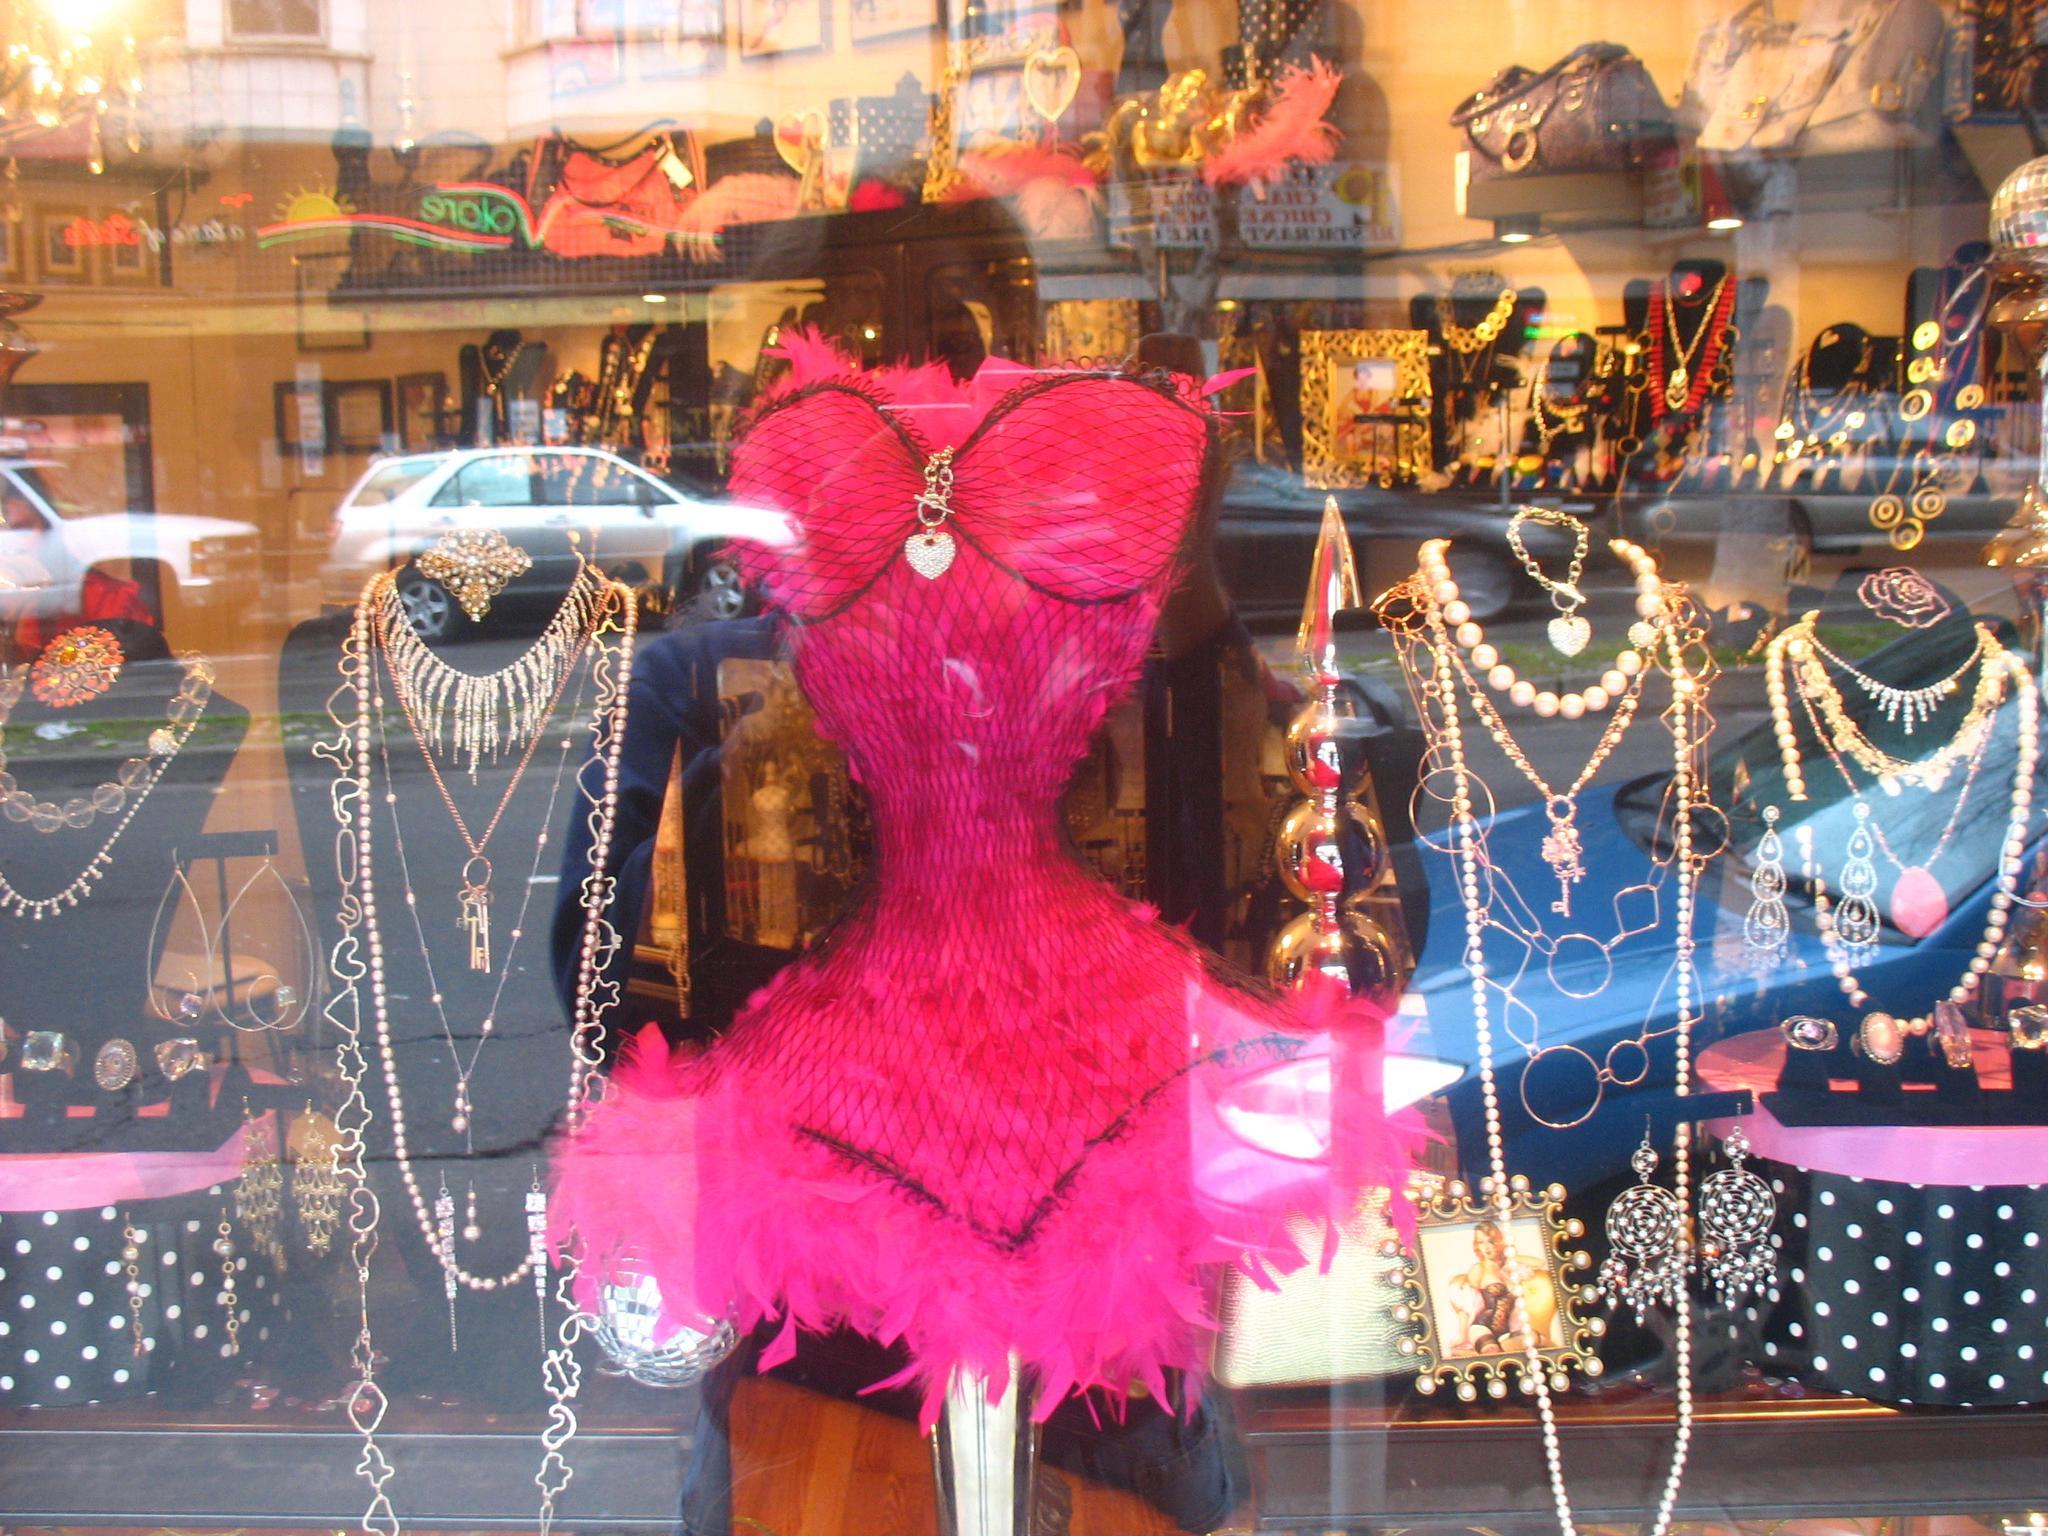 a store window with clothing on display in it